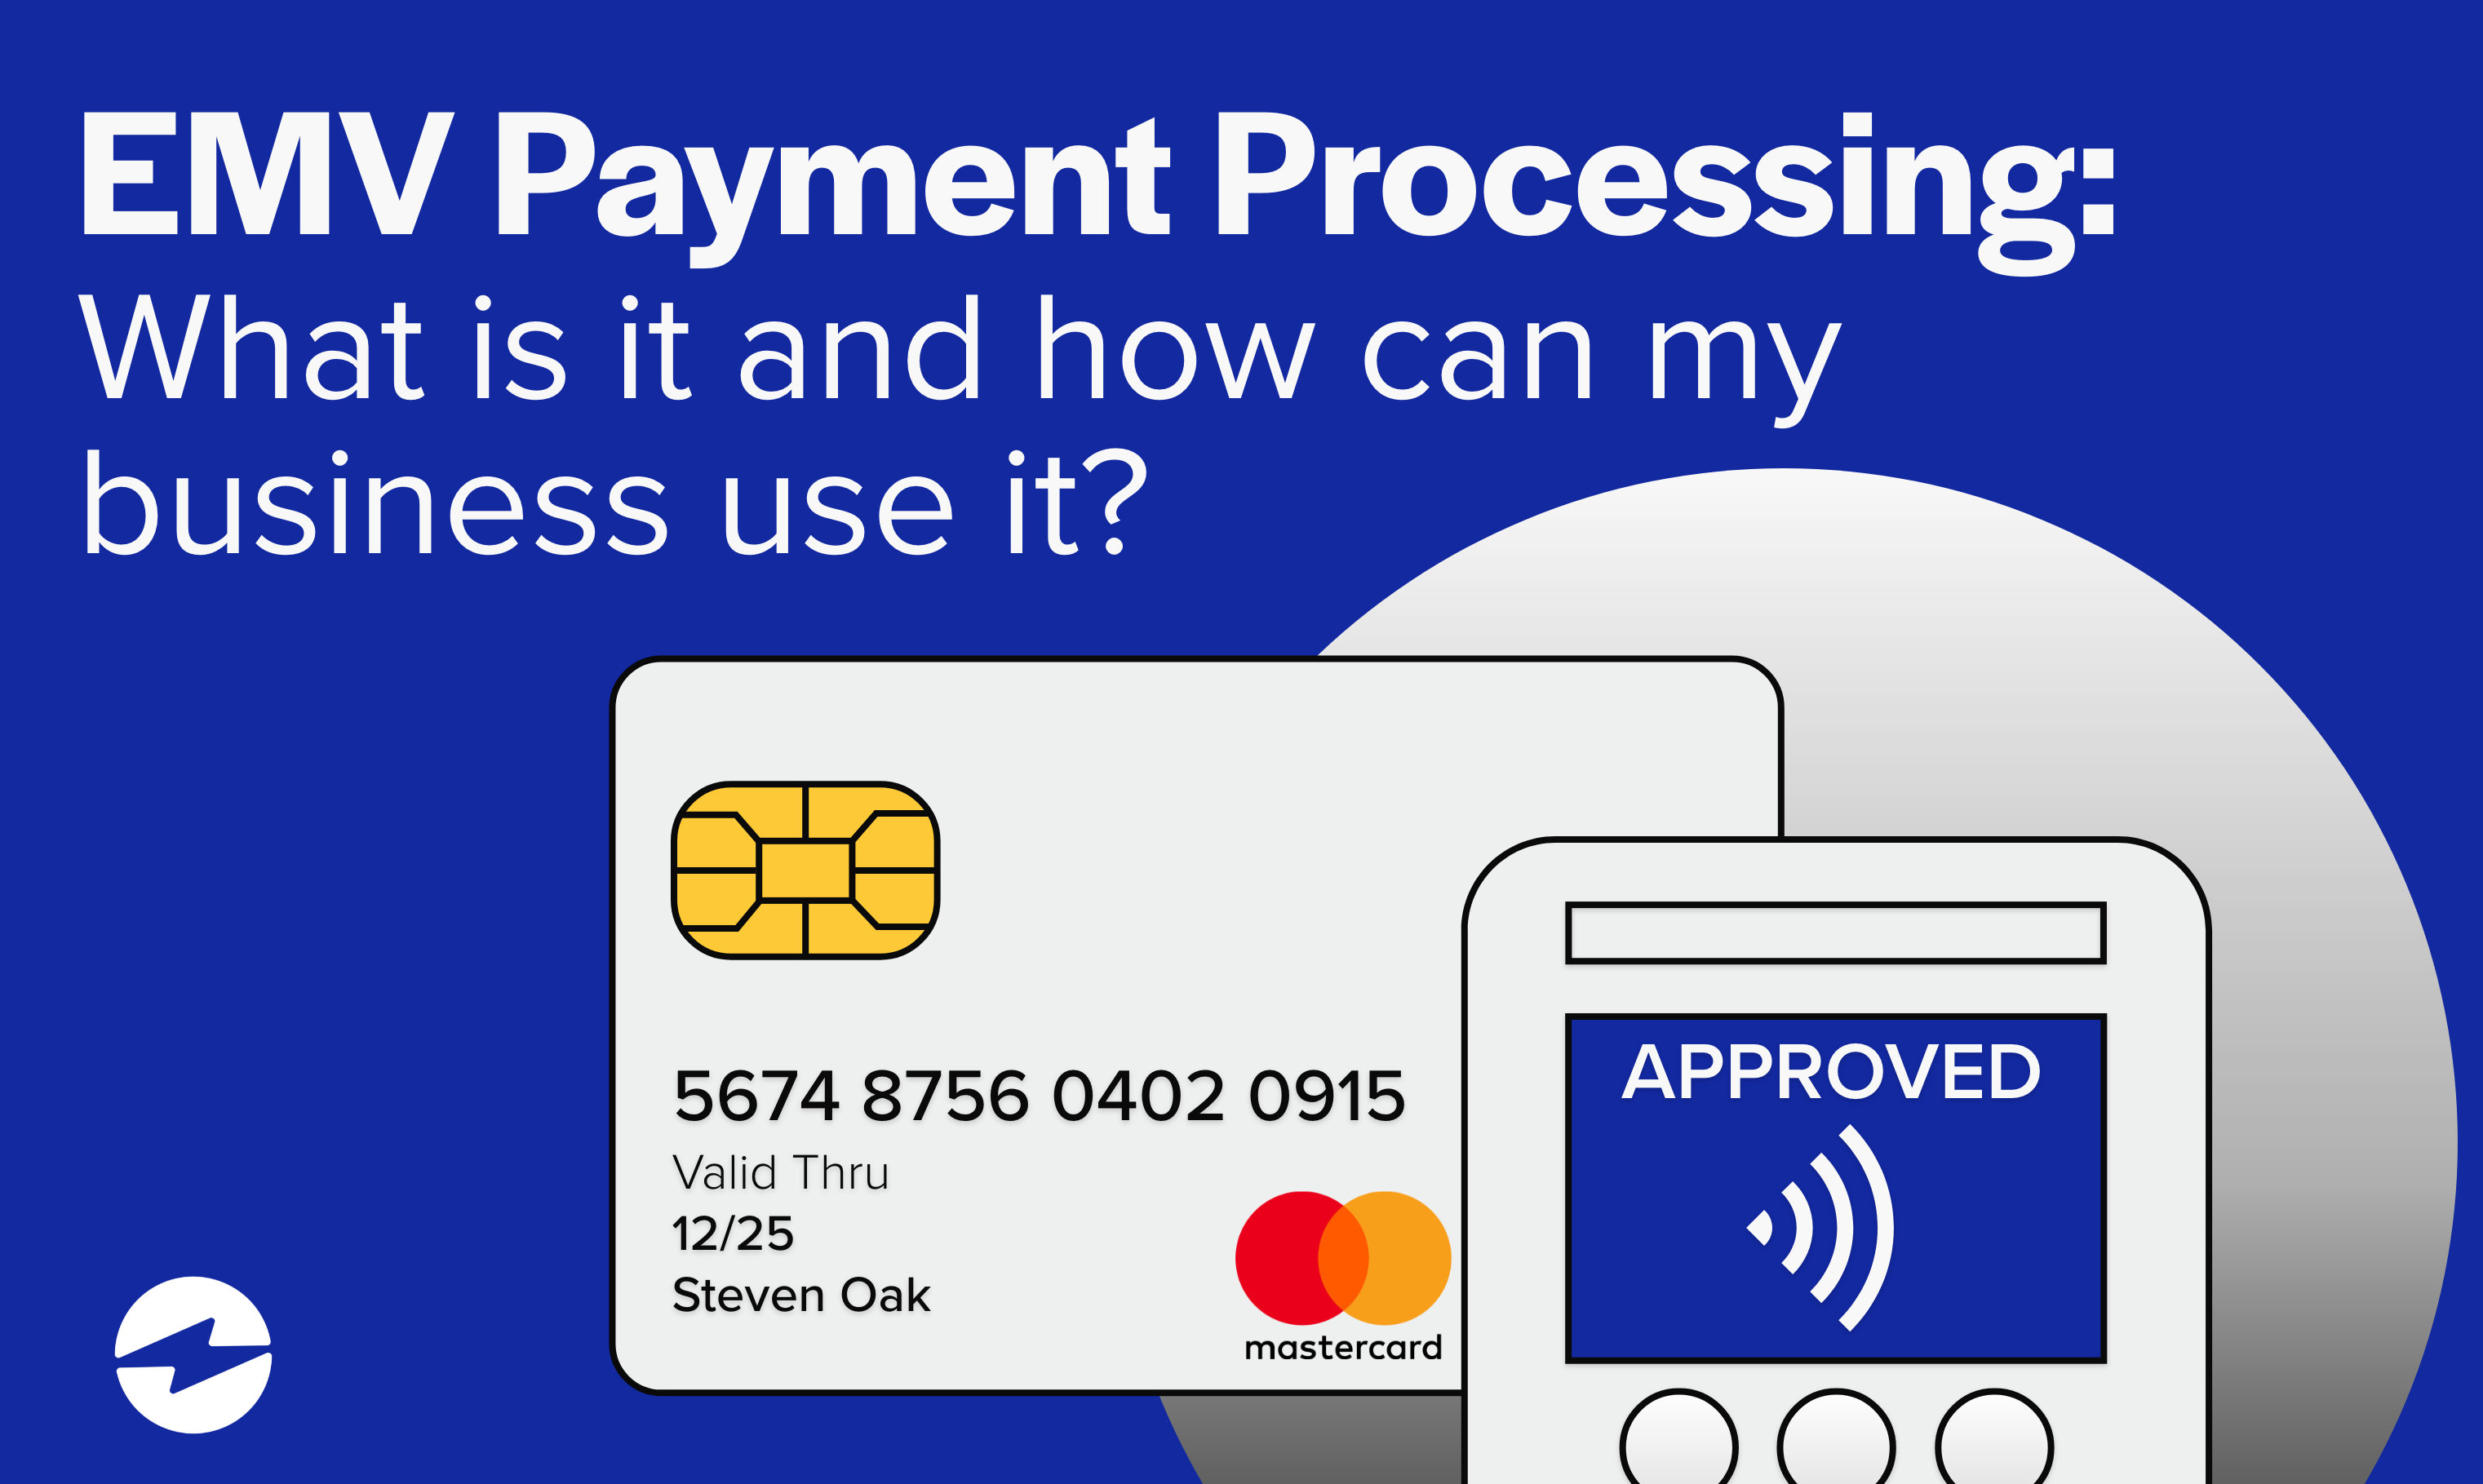 What is EMV Payment Processing and How Can My Business Use it?